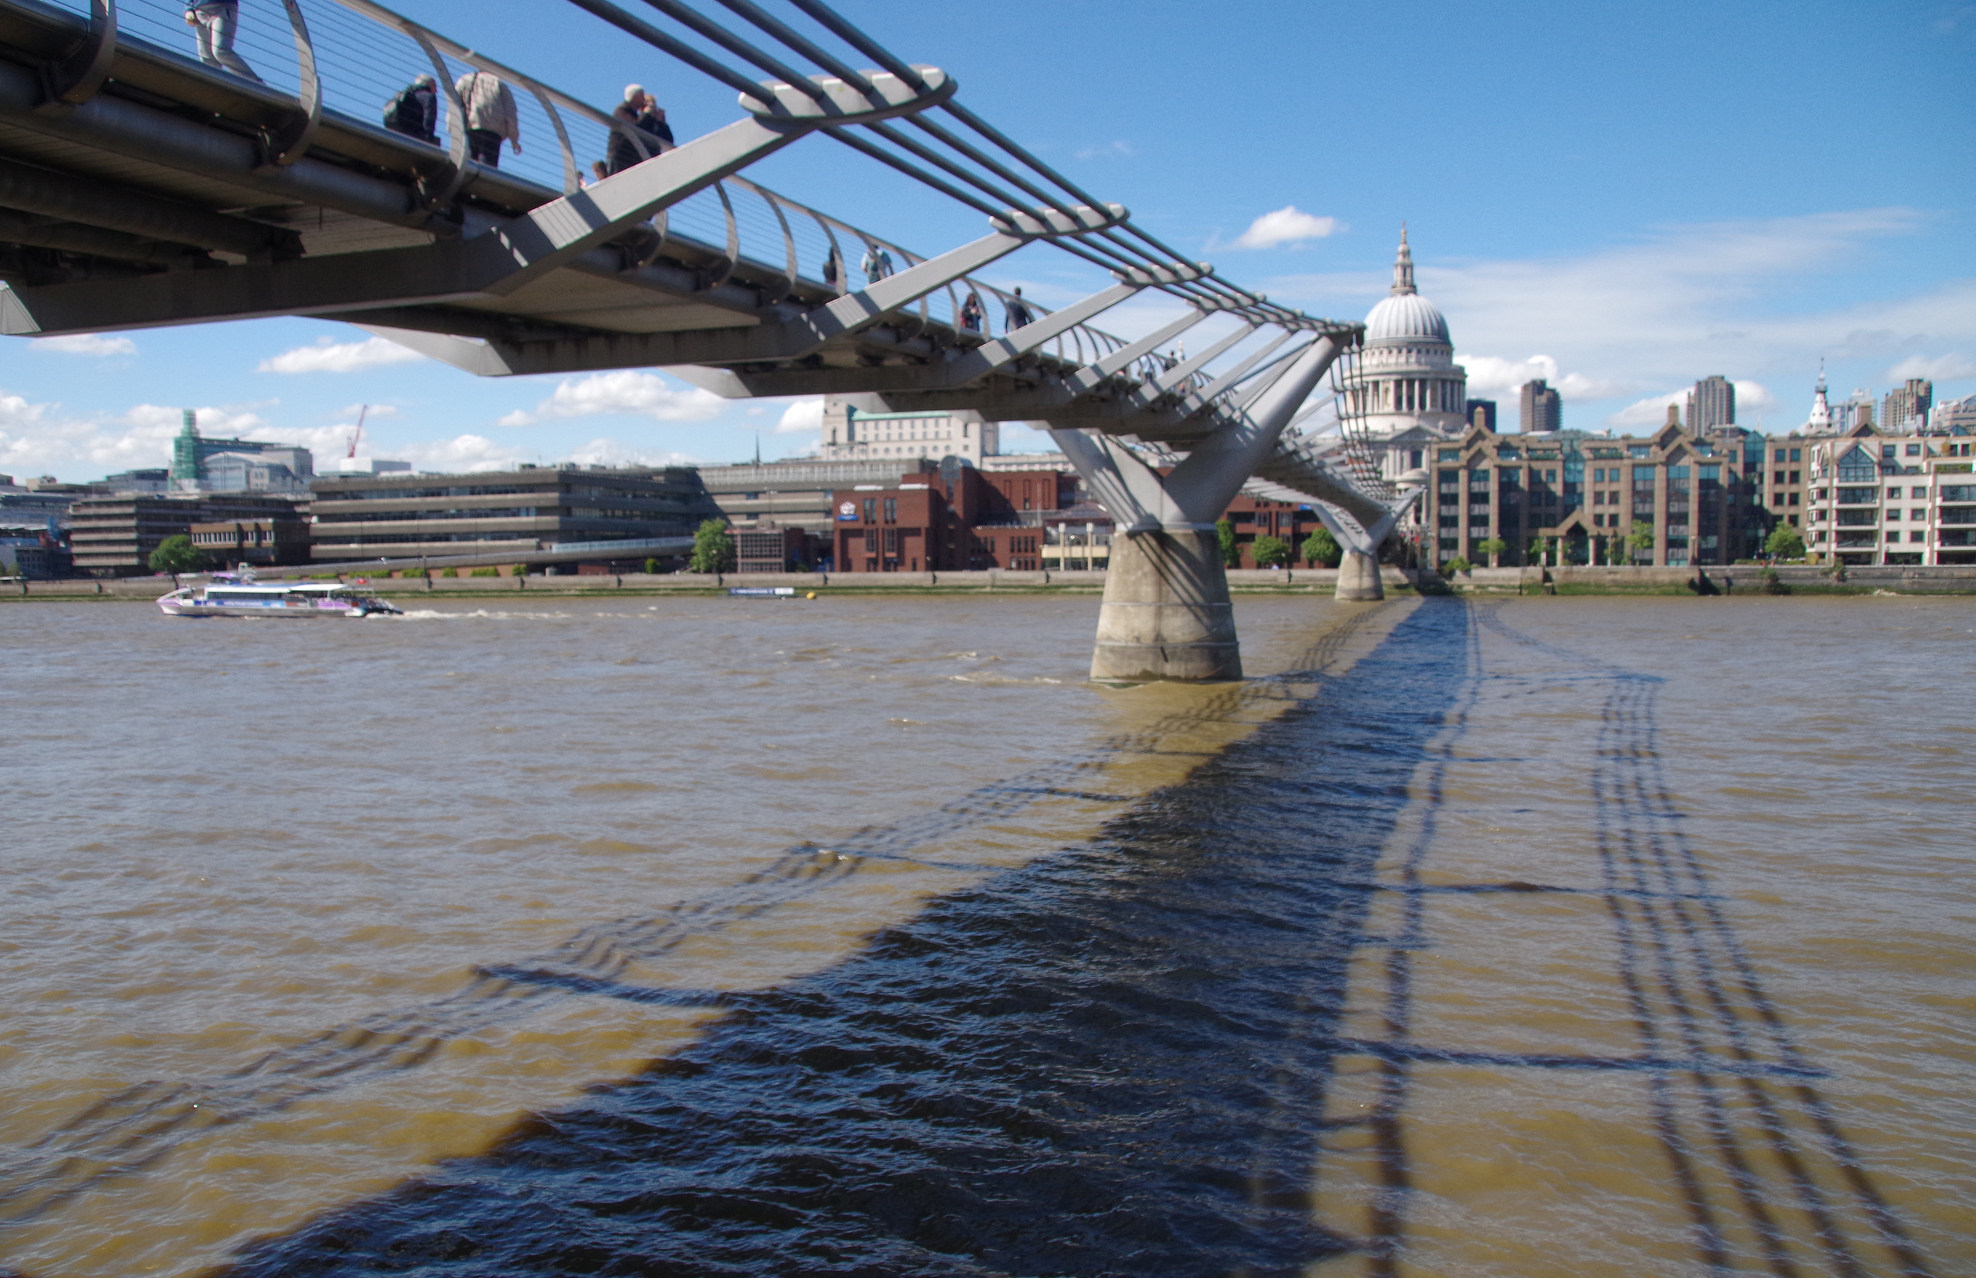 The Millenium Bridge, with St Paul's Cathedral in the background. Image by Donald Judge / CC BY 2.0